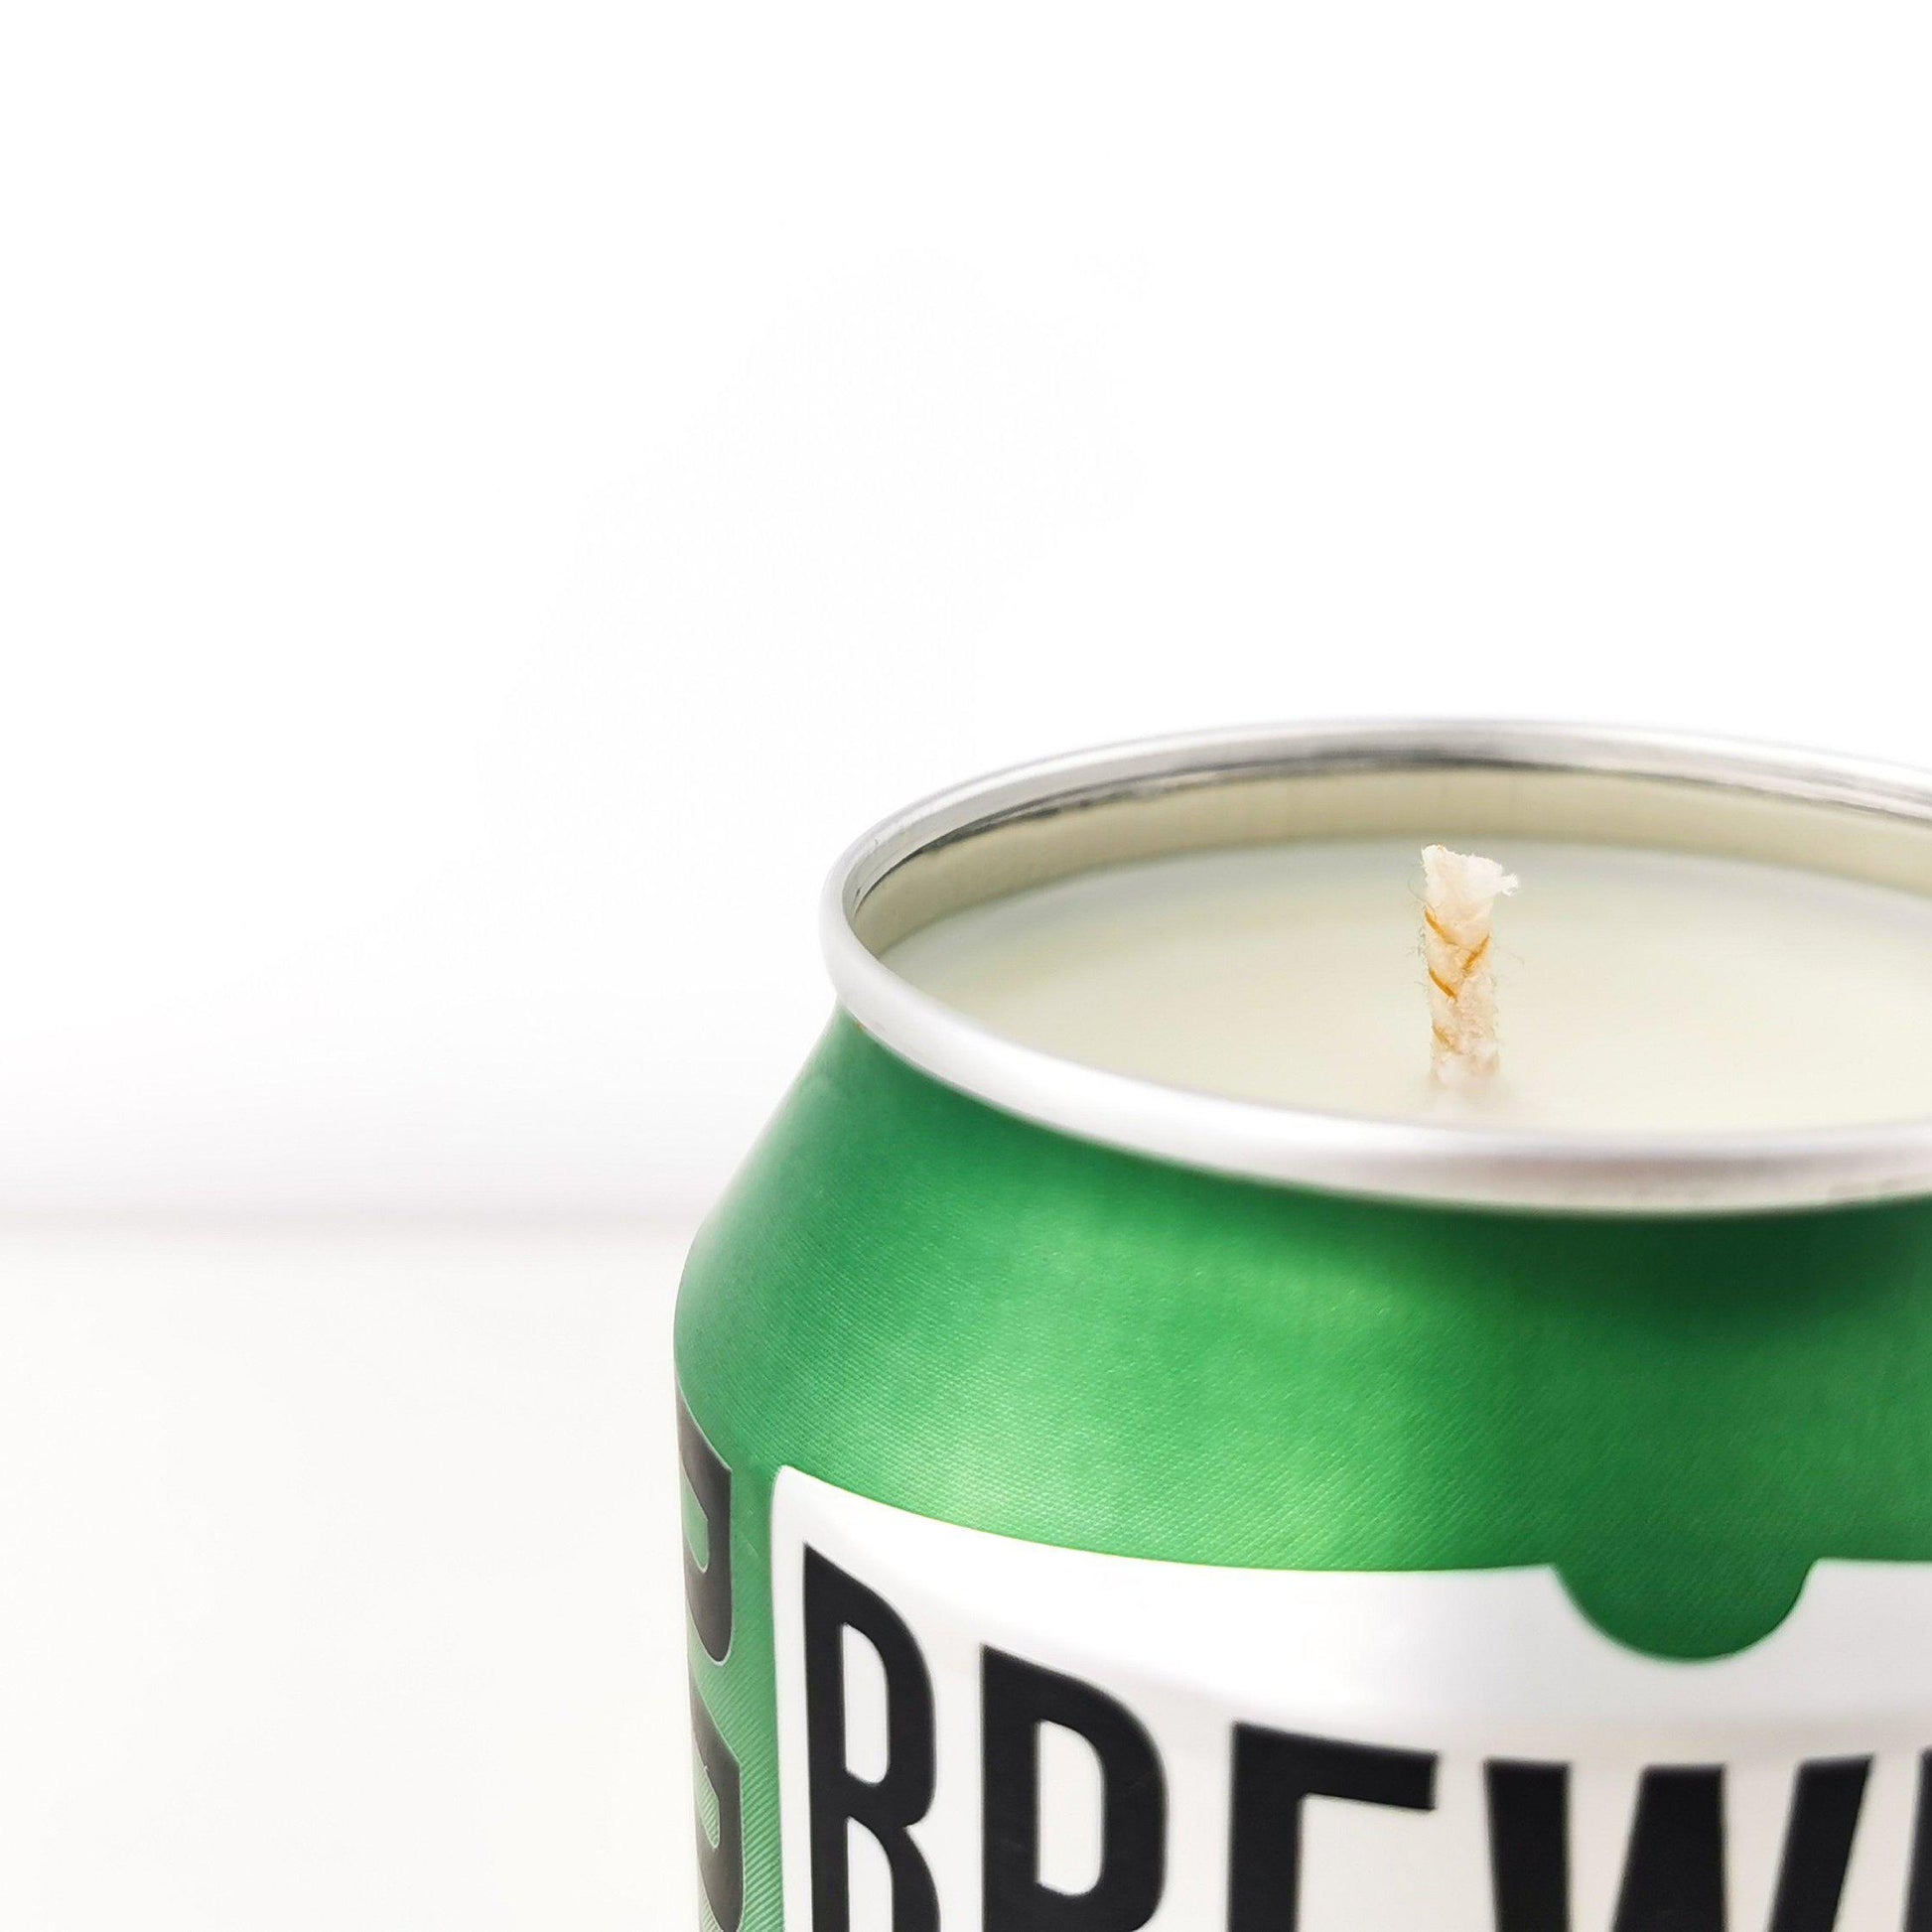 BrewDog Nanny State Craft Beer Can Candle Beer Can Candles Adhock Homeware